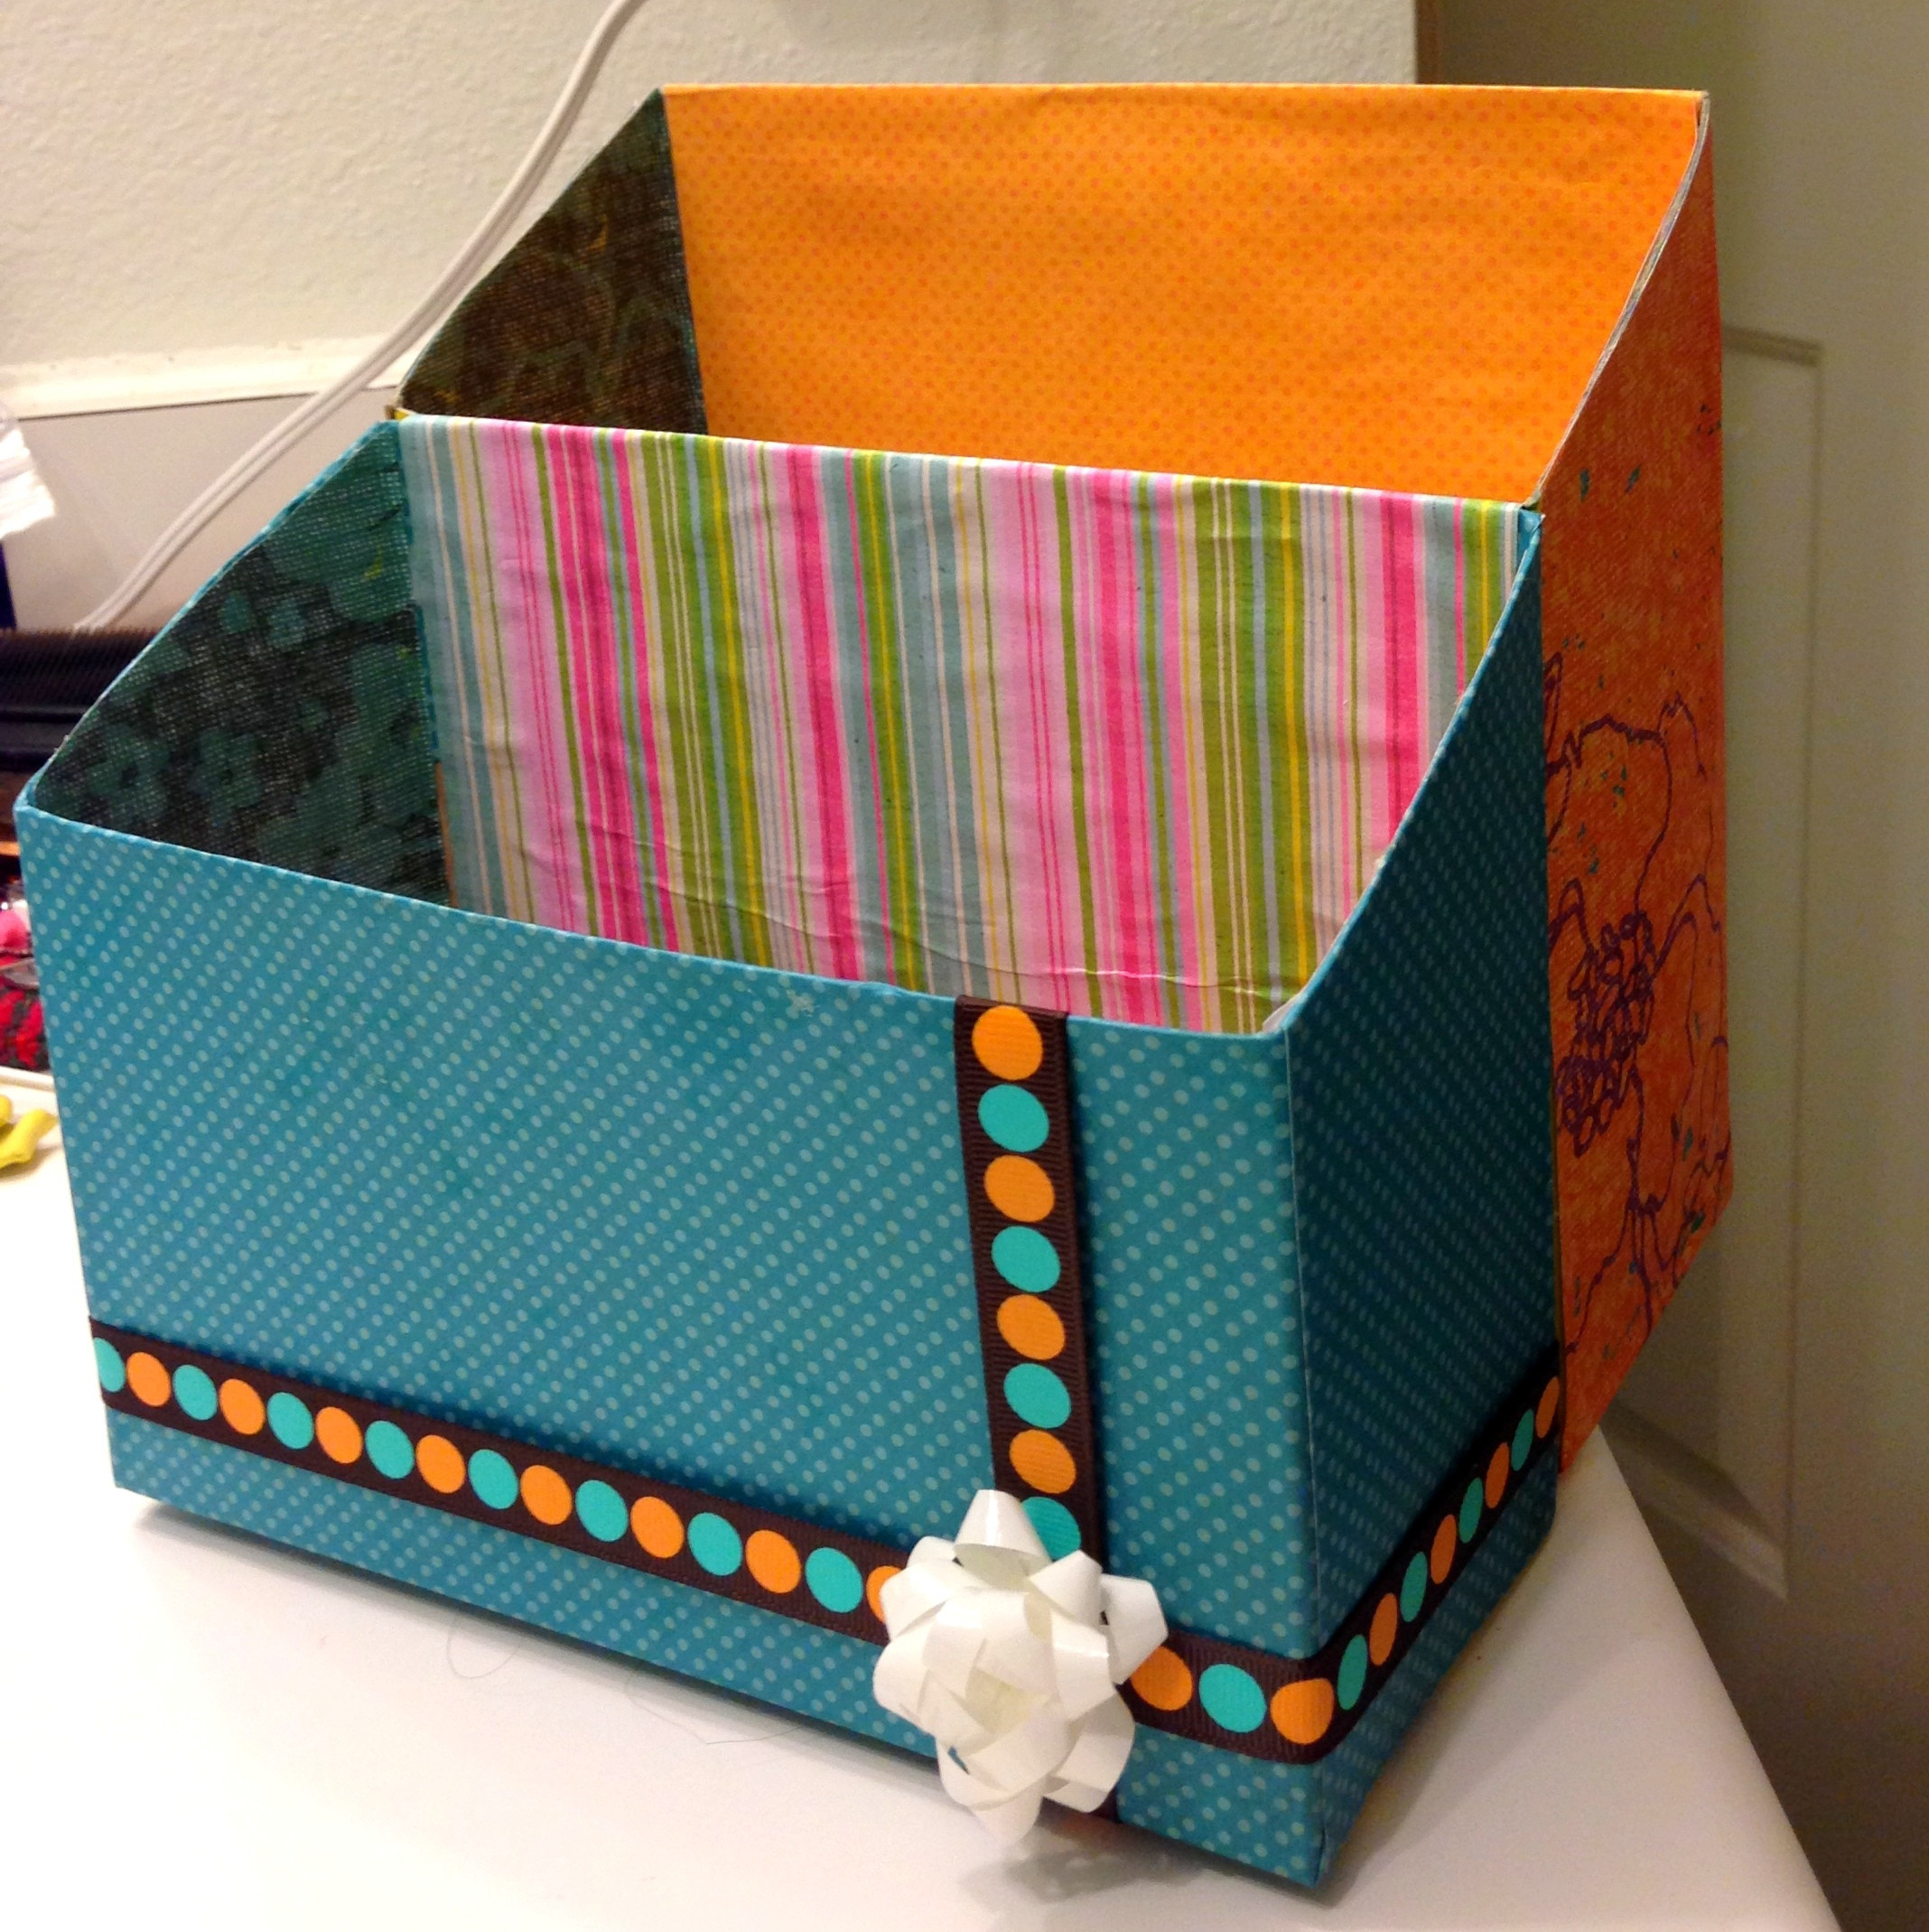 DIY Cereal Box
 DIY mail organizer from cereal box